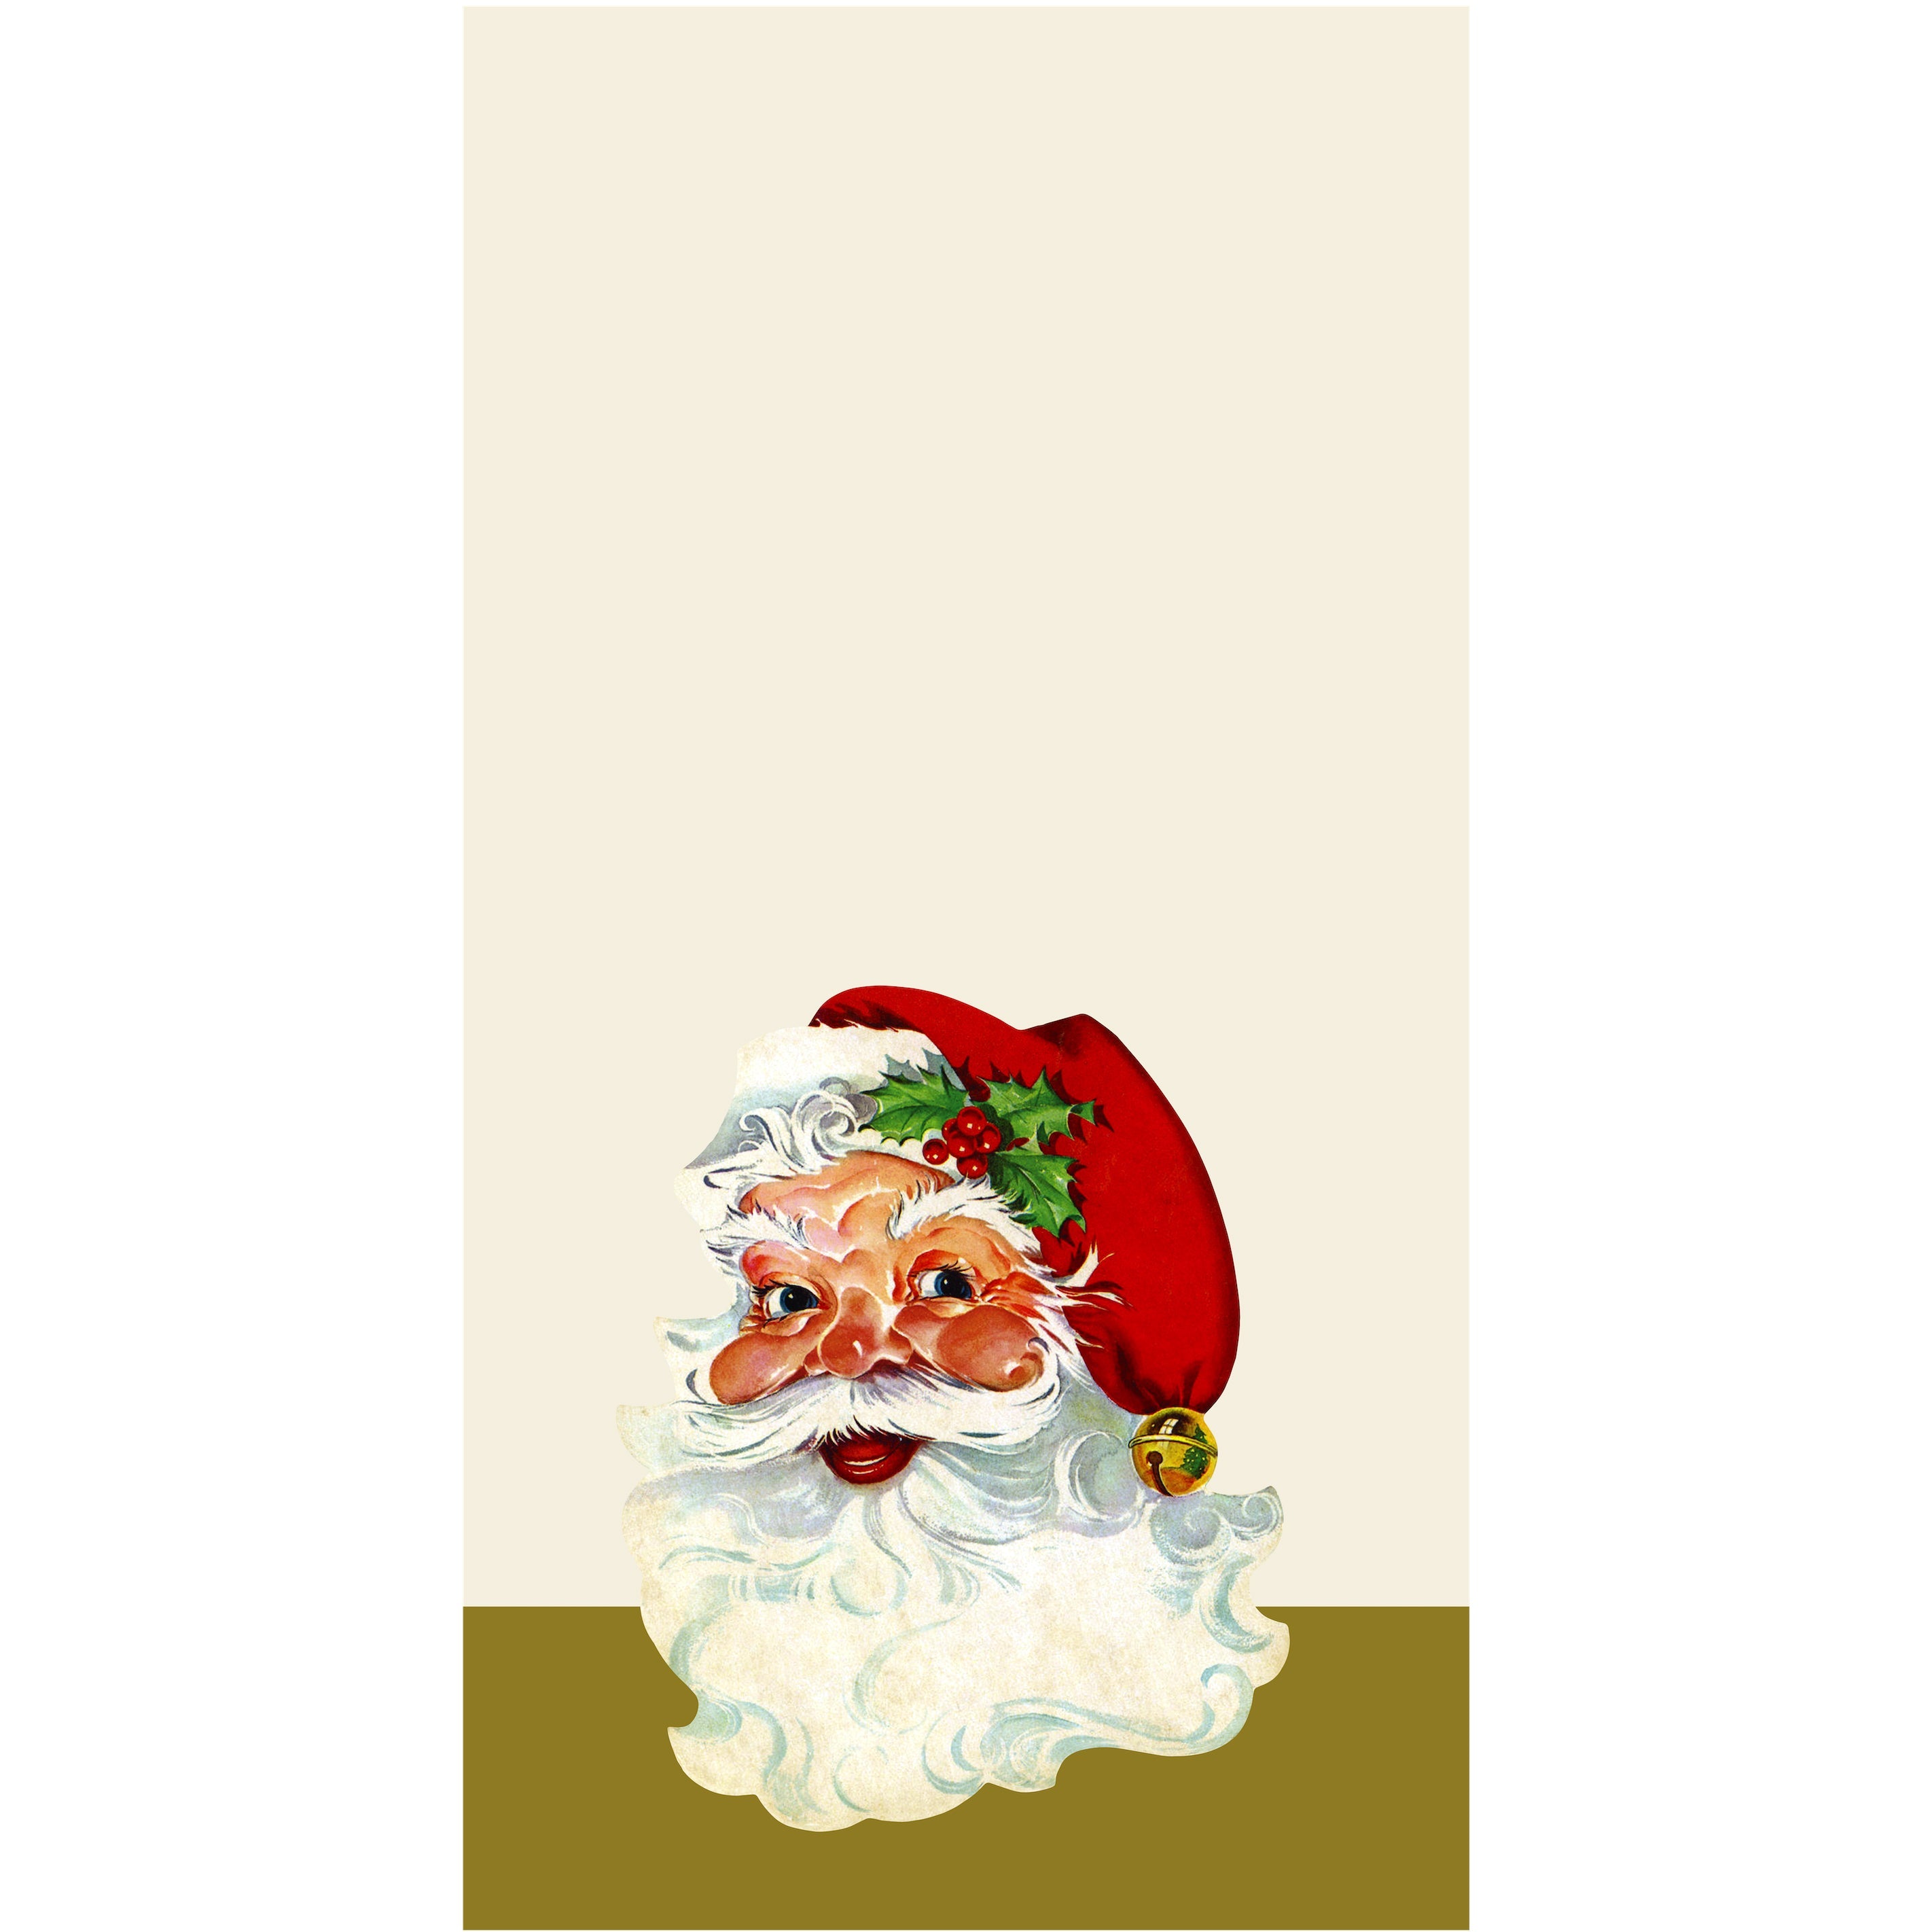 A rectangle, cream guest napkin with gold along the bottom edge, featuring a vintage-style illustration of Santa Clause&